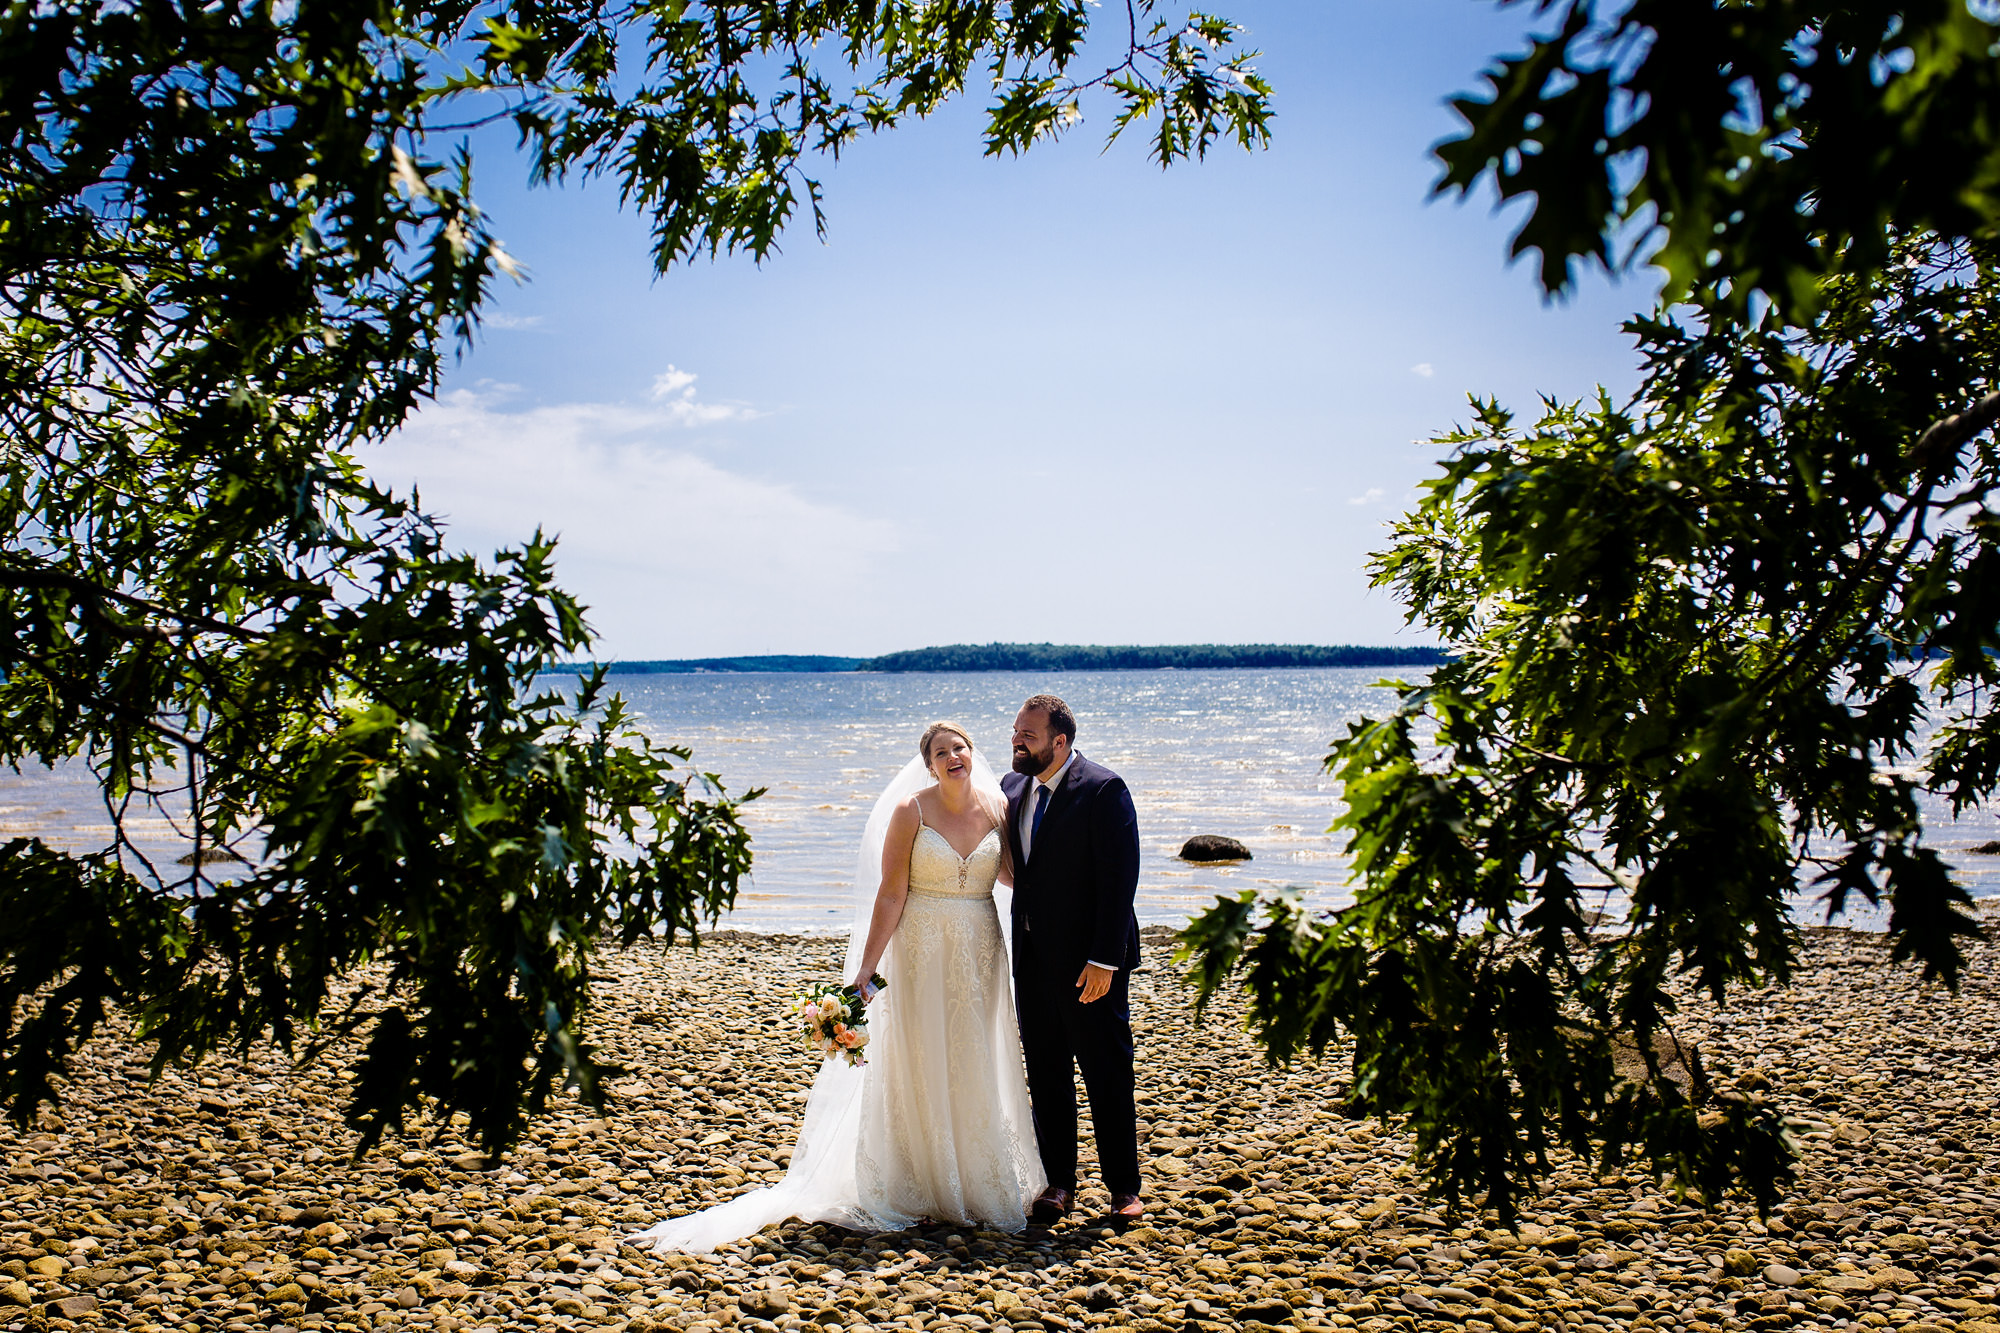 A wedding portrait taken on the beach at French's Point in Maine